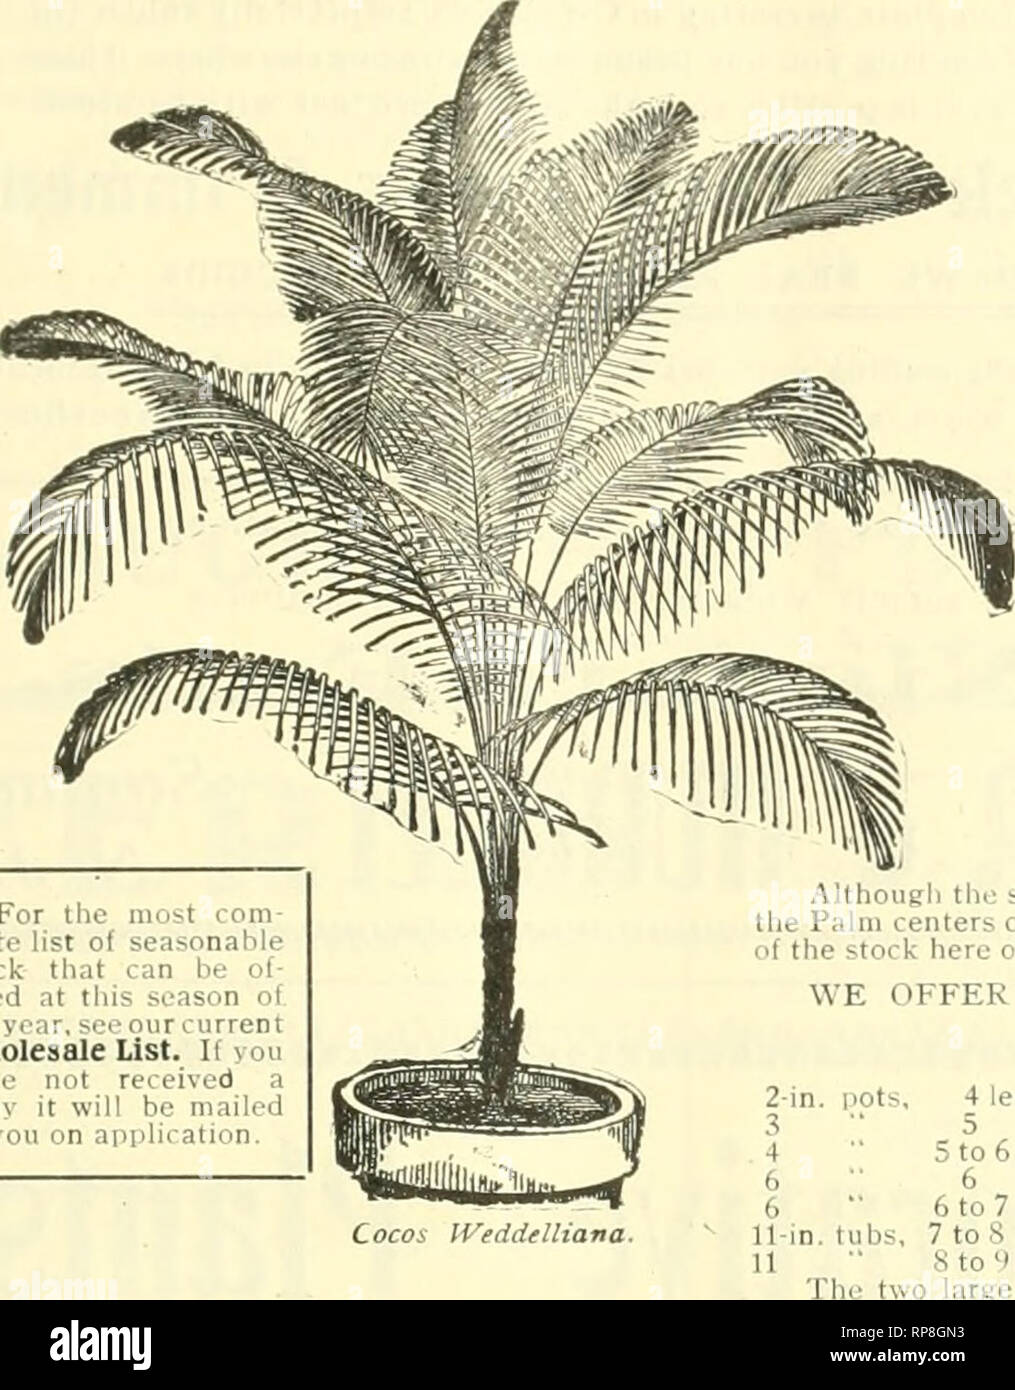 . The American florist : a weekly journal for the trade. Floriculture; Florists. igo8. The American Florist. 141 DreerVjiiiliS Special Offer of Palms Cocos Weddelliana A yraiid lot of plants in 7-in. pots. eleKant, tiraceful specimens 30 inches high, perfect in every w;iy, something entirely ditterent from what vou have boen ottering to your customers in the Decorative line hereto- fore, and a plant which will appeal to everyone Price, $2.50 each: also a smaller size in 5-in. pots. 24 inches hij,'h, at $1.00 each. We are also carryintr in stock an clcuant line of tlie usual sizes for Fern Dish Stock Photo